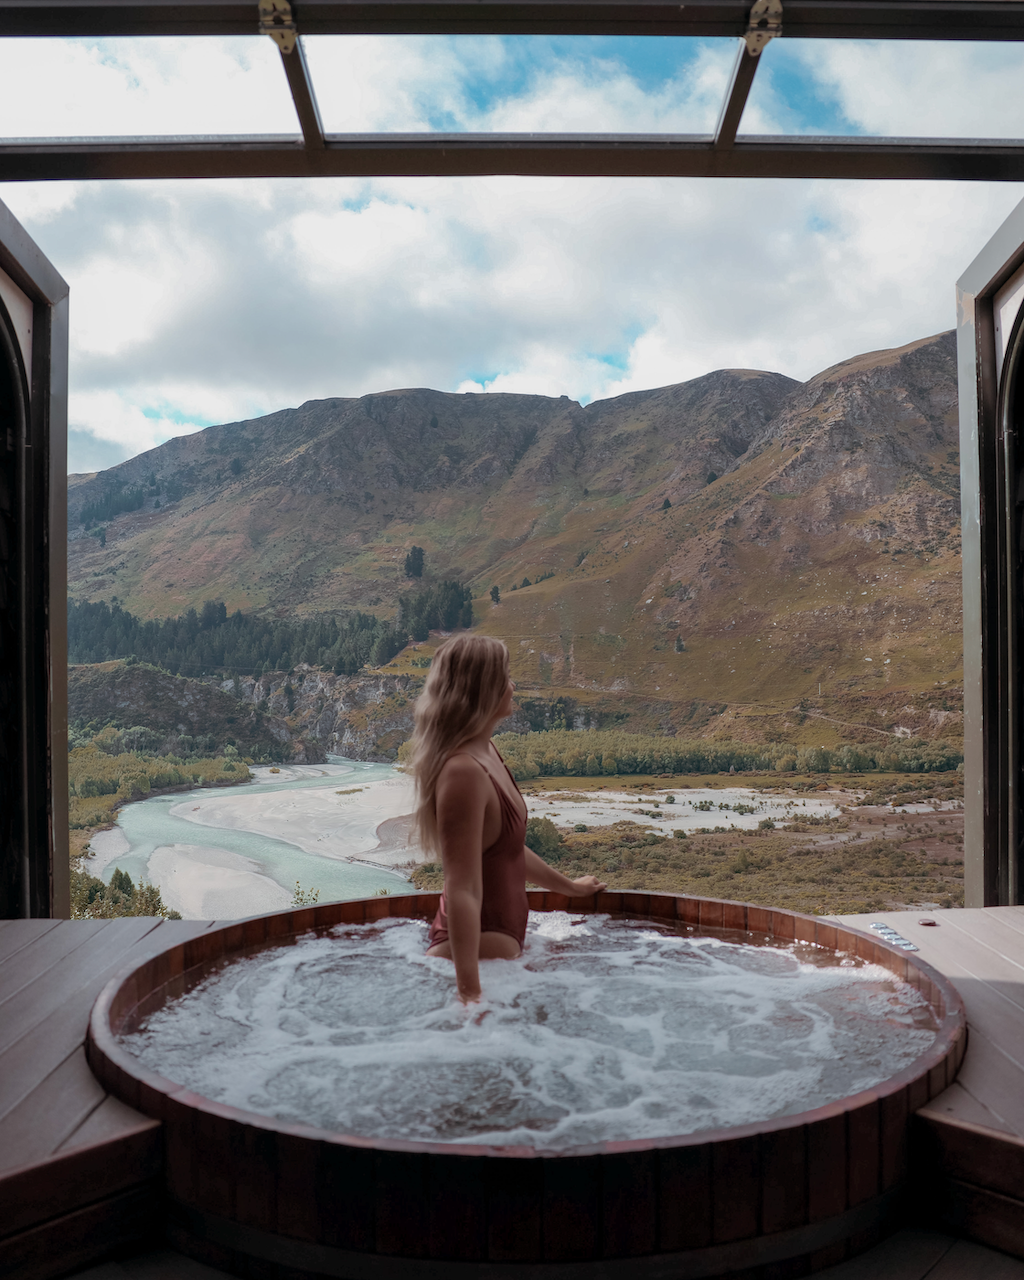 Enjoying the view on Shotover River from the spa - Queenstown - New Zealand